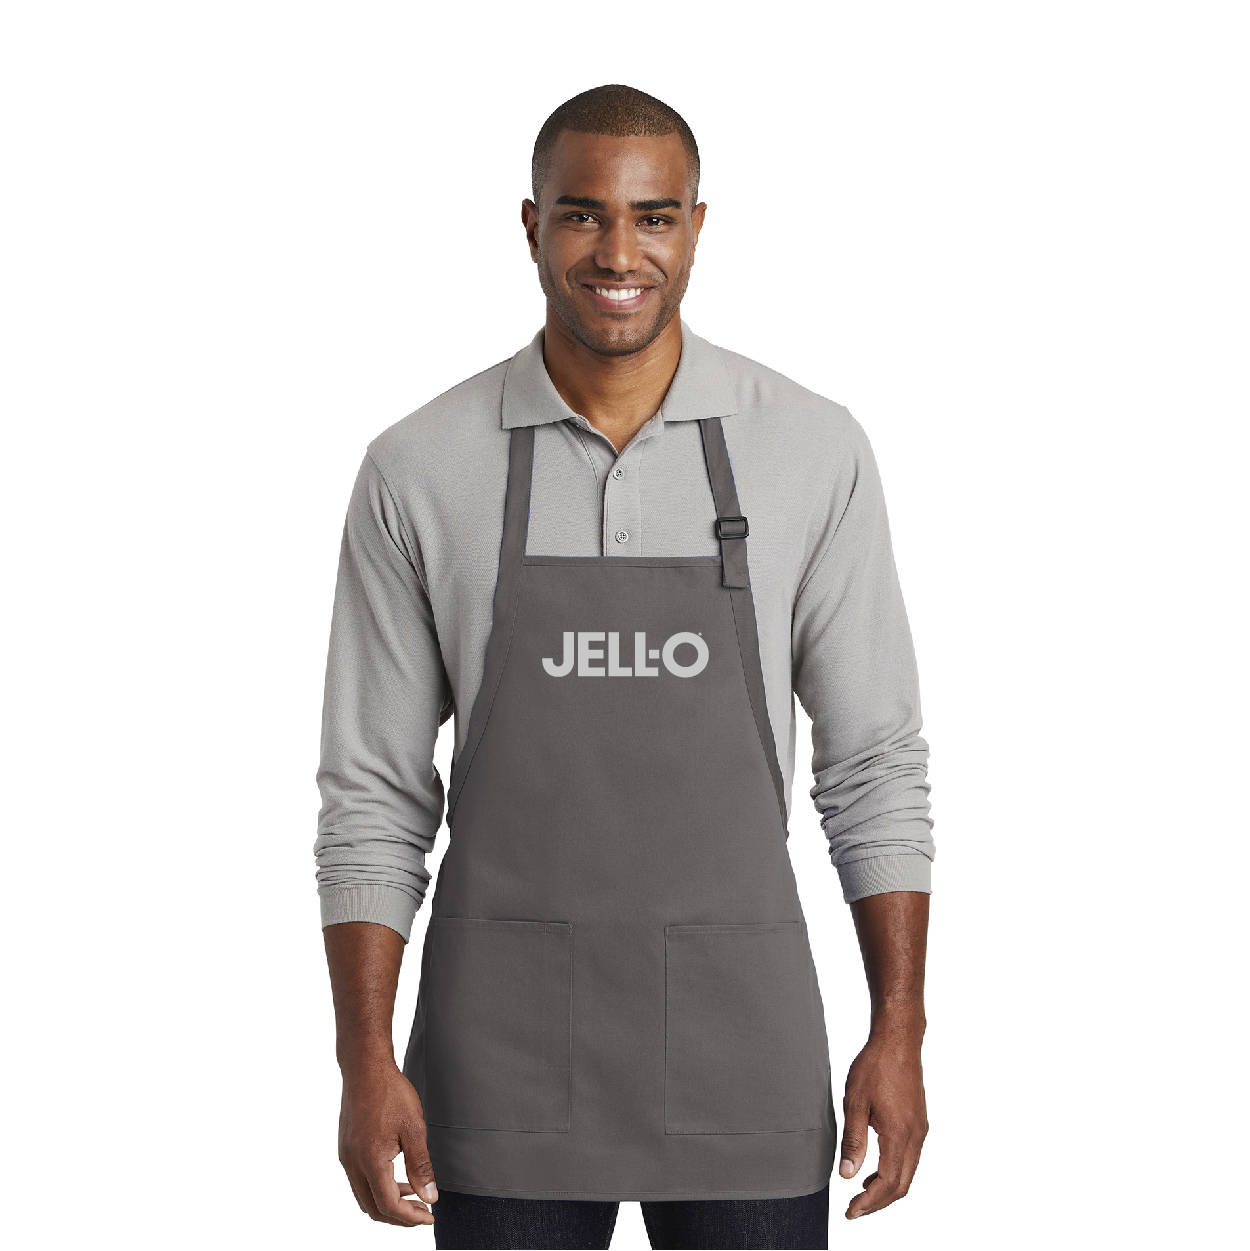 aprons and chef coats as promotional products